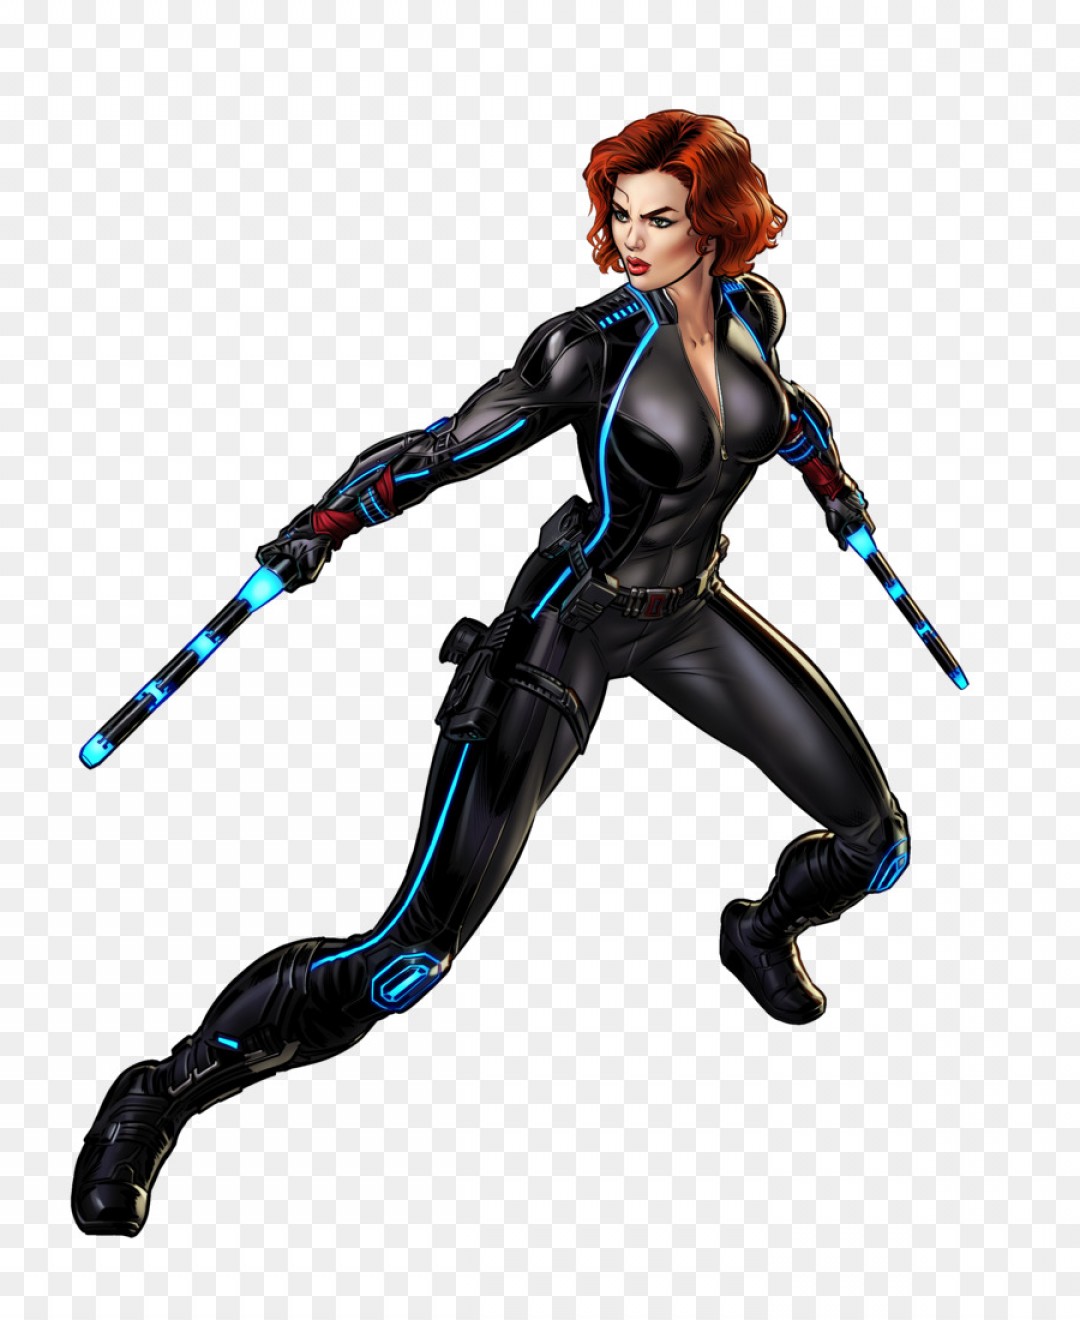 Avengers Clipart Black Widow and other clipart images on Cliparts pub™